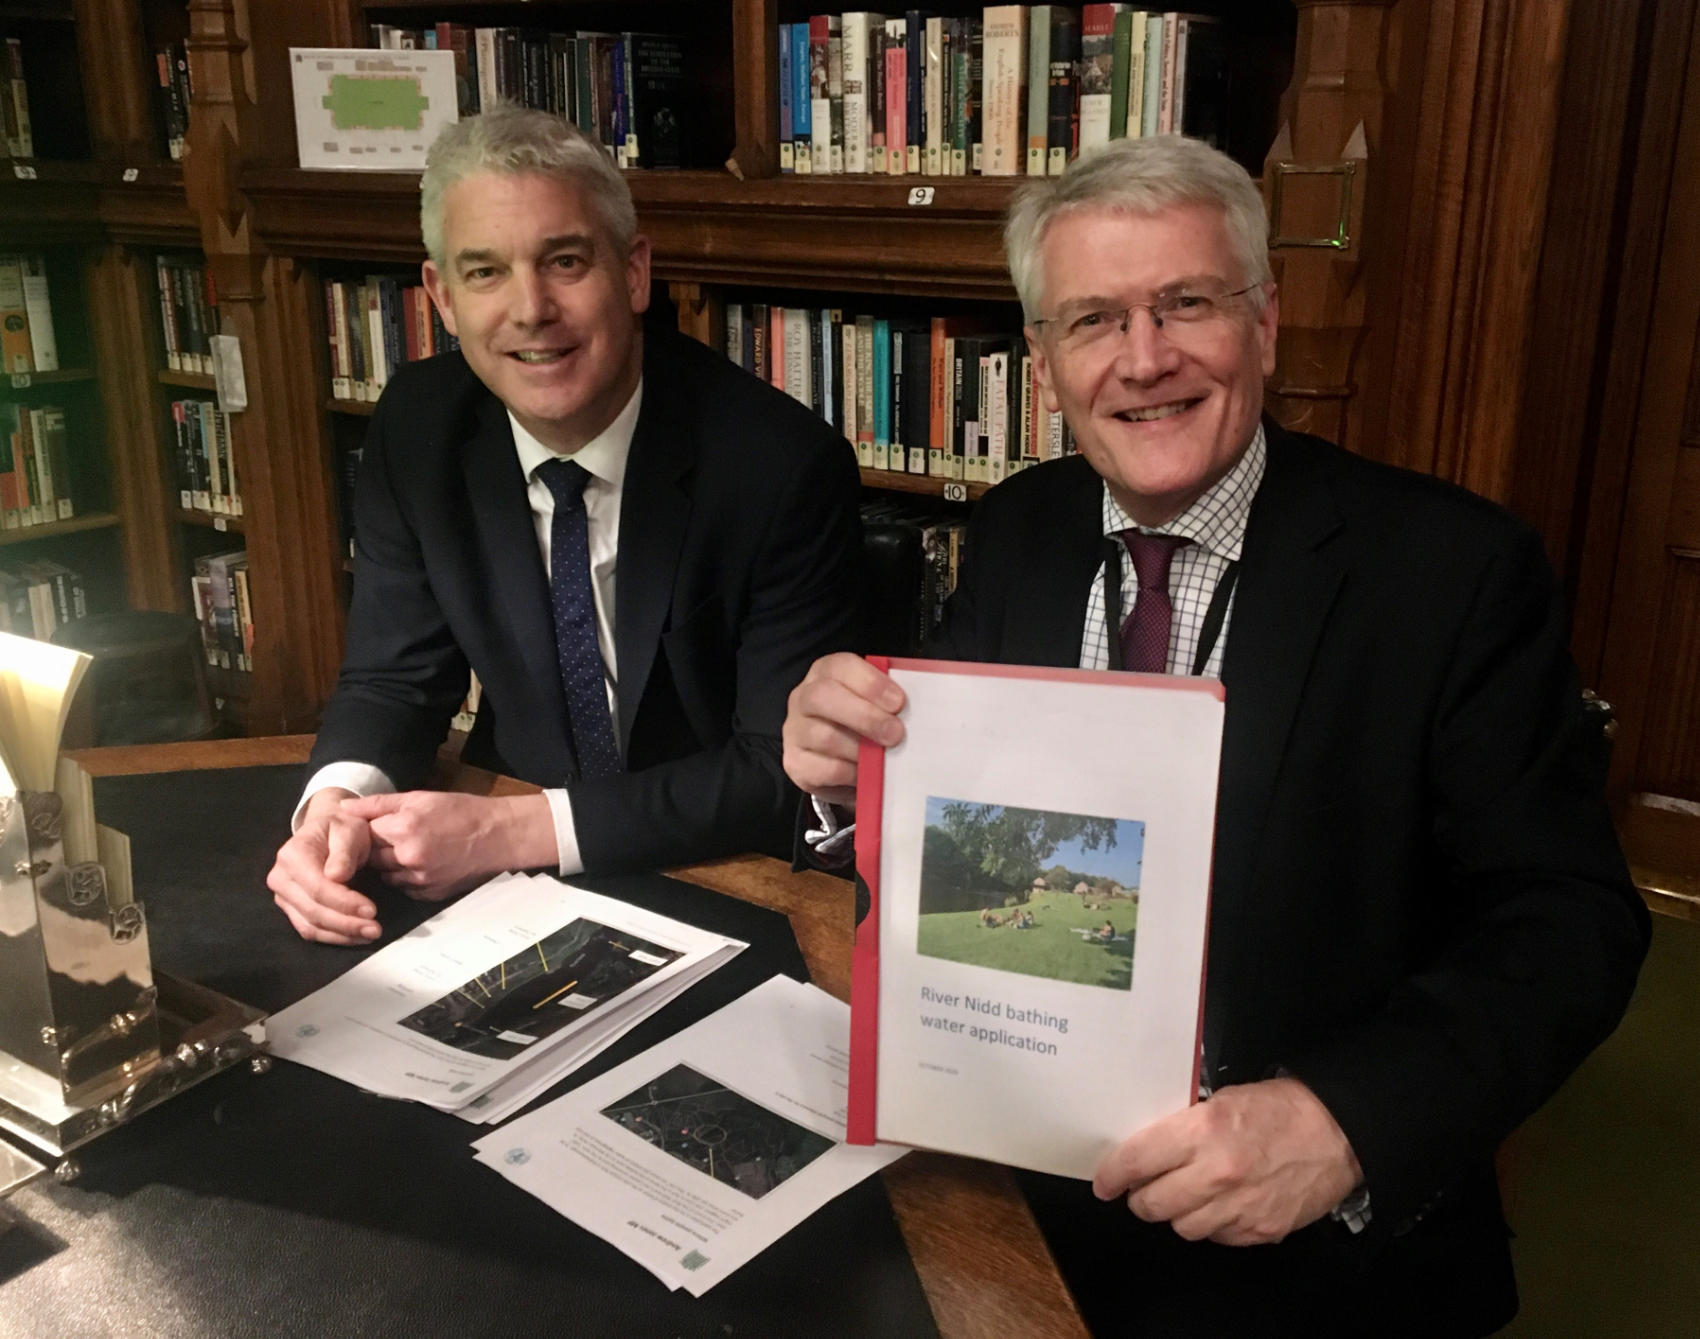 Harrogate and Knaresborough MP, Andrew Jones, has briefed the new Secretary of State for the Environment, Rt Hon Steve Barclay MP